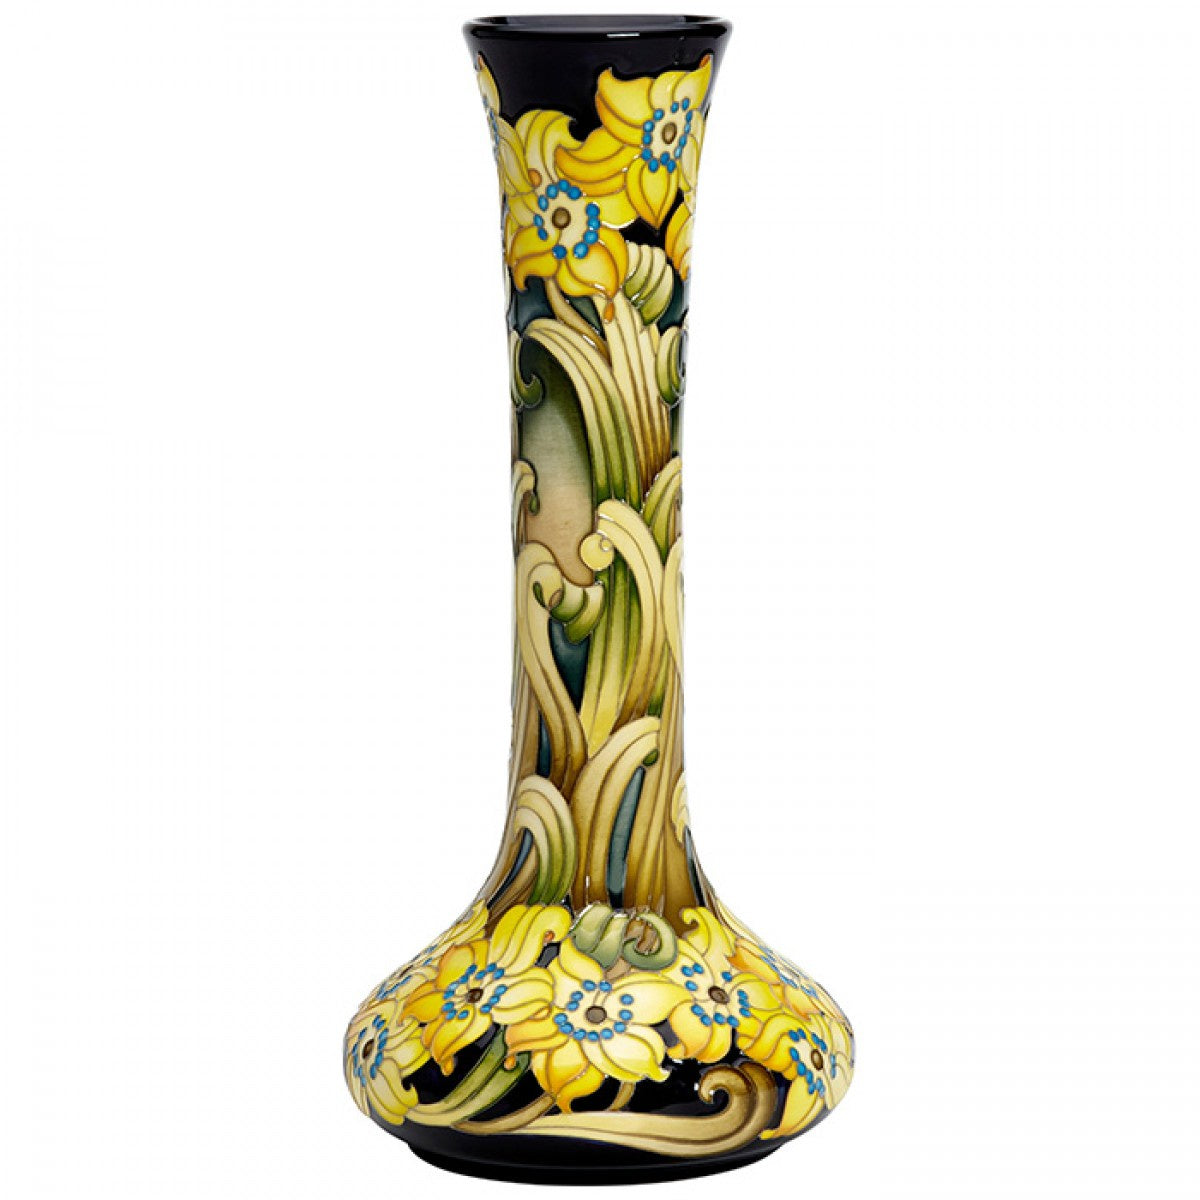 Daffodils of Olde Vase 99/11 Numbered Edition